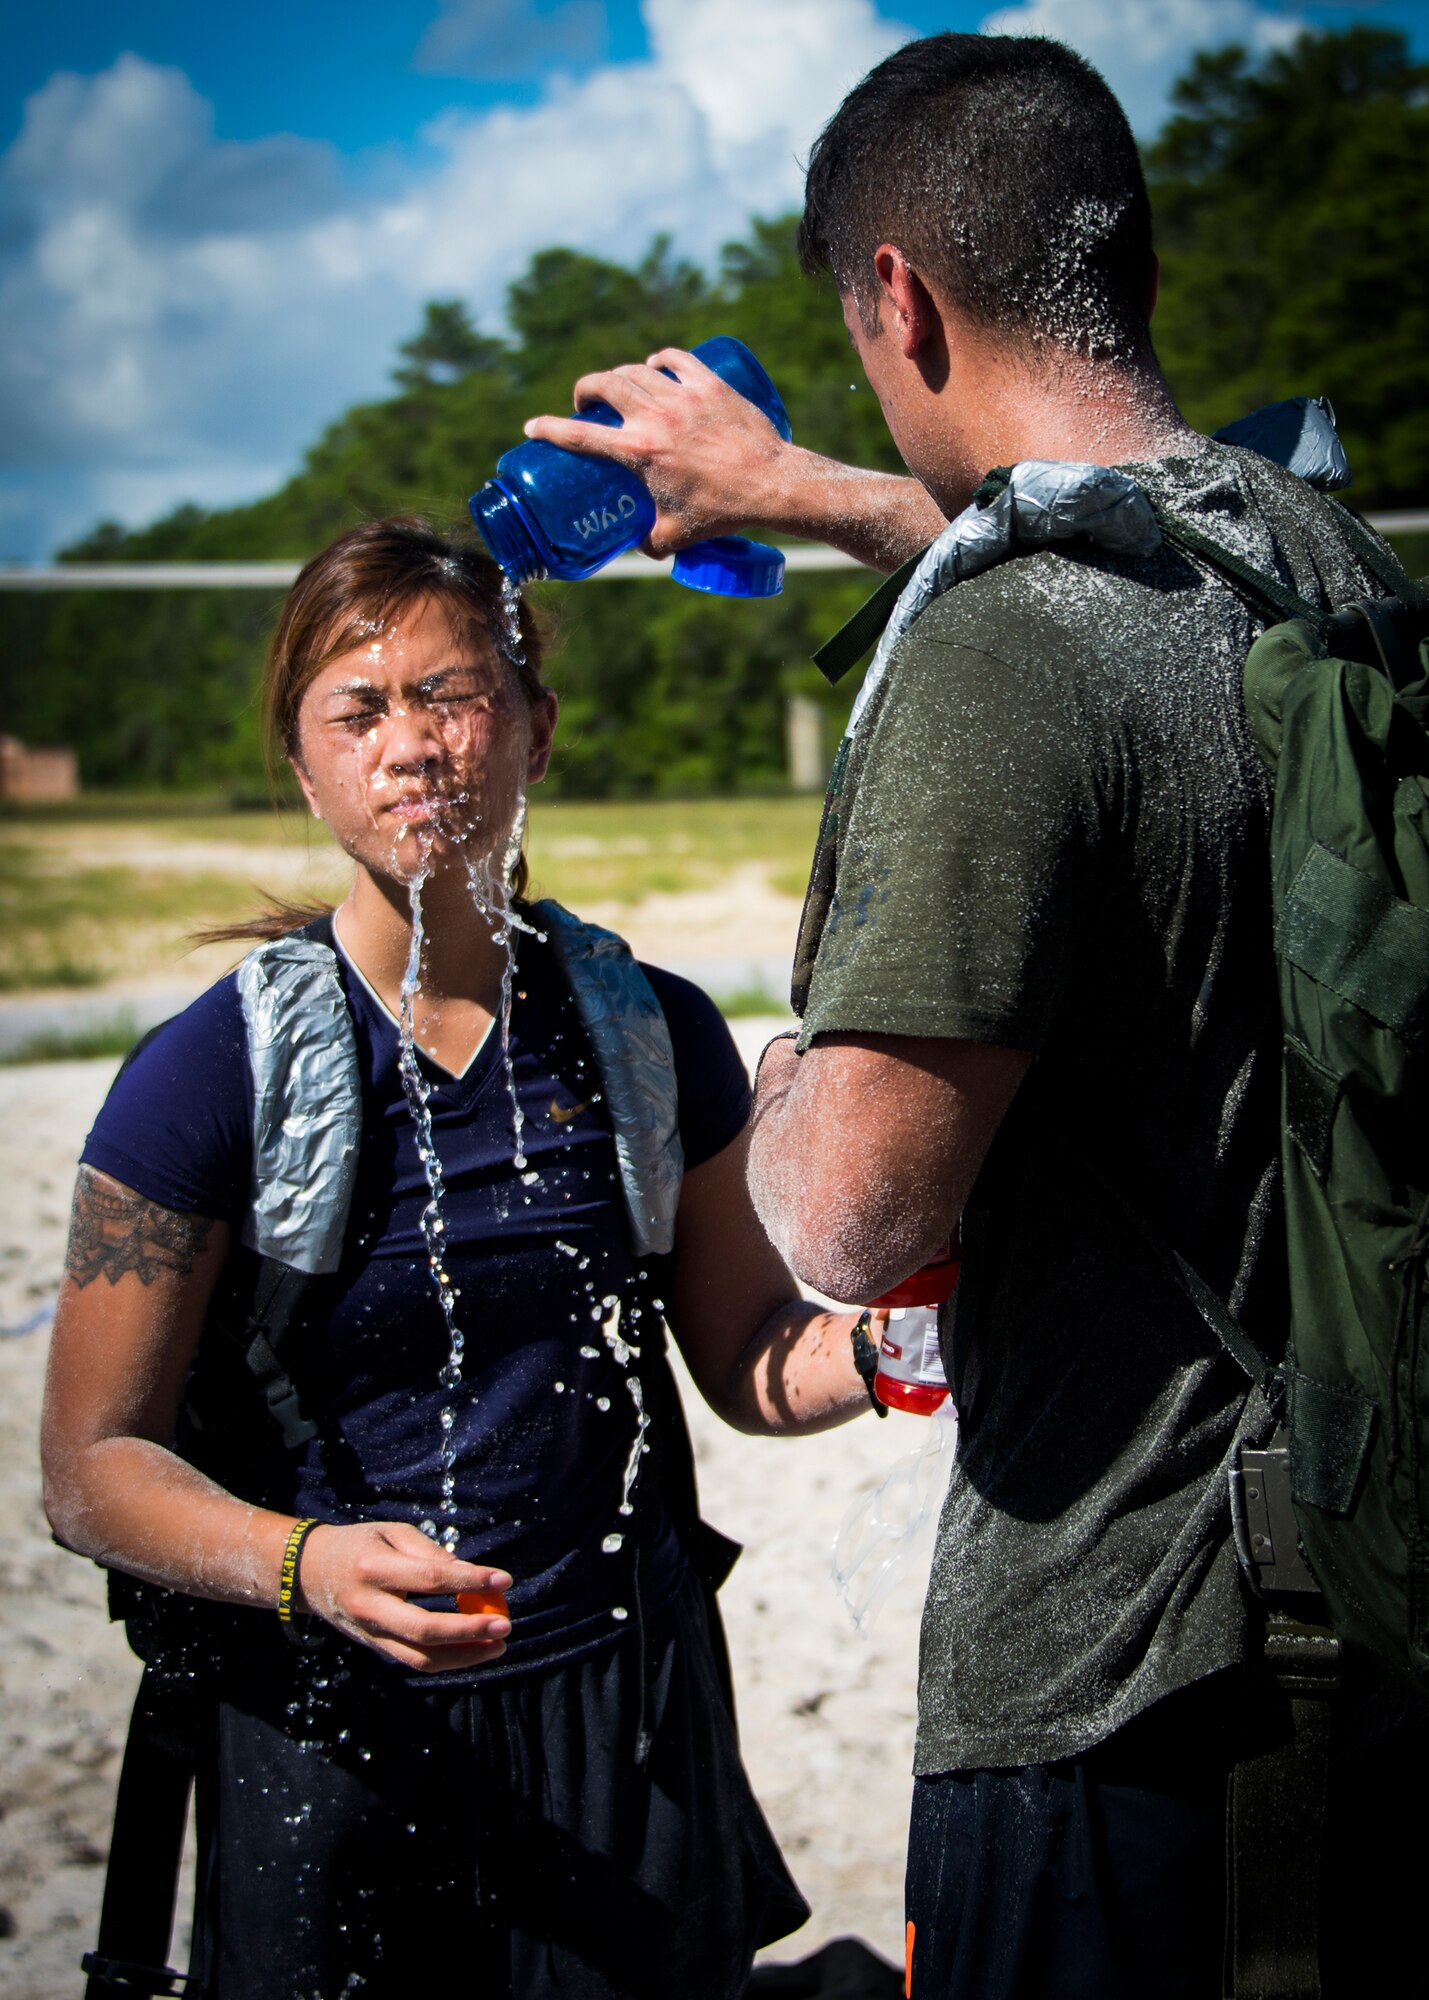 Nick Camargo pours water over his wife, Lyna Camargo, to help cool her off during the GORUCK Cohesion Challenge Sept. 11, at Eglin Air Force Base, Fla.  This elite team-building event, led by a Special Forces veteran, featured military inspired challenges and missions.  Only 24 out of the original 27 completed all obstacles.  Eglin is the fifth base to complete the Team Cohesion Challenge, which is modeled after special operations training.  (U.S. Air Force photo/Tech. Sgt. Jasmin Taylor)